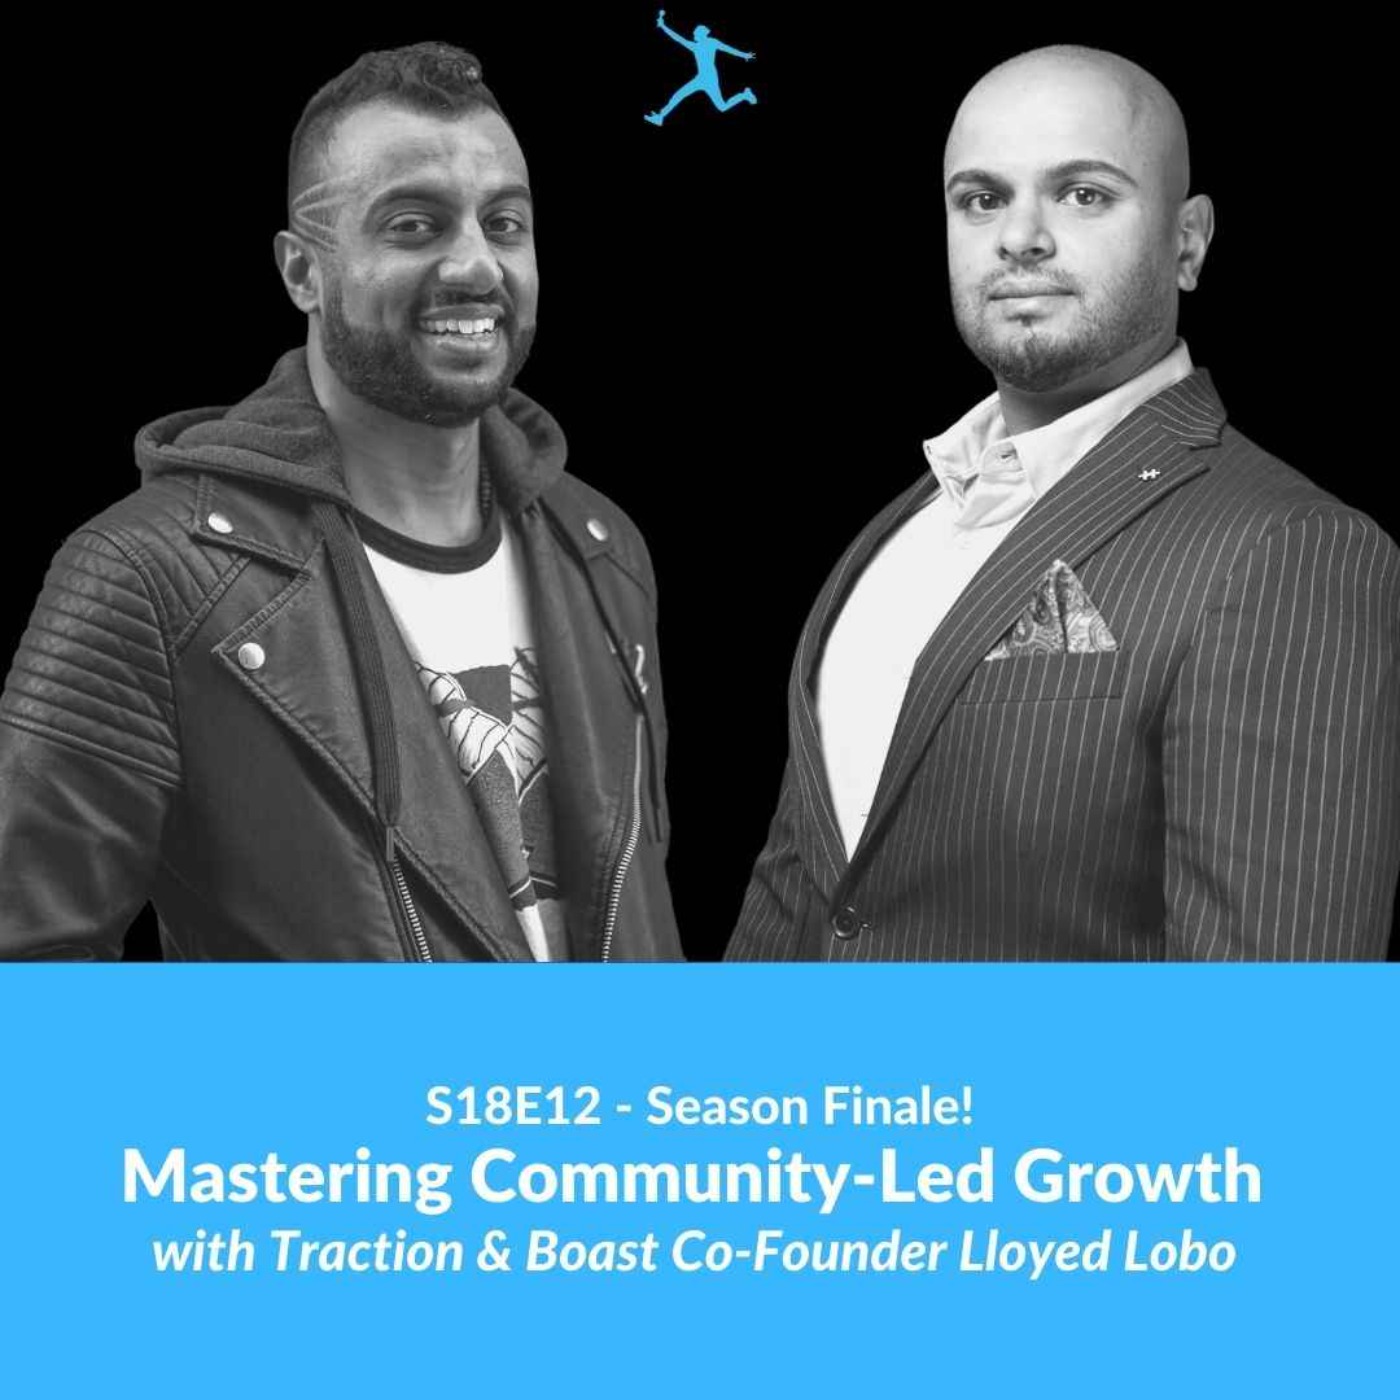 S18E12: Mastering Community-Led Growth with Traction & Boast Co-Founder Lloyed Lobo (Season Finale!)